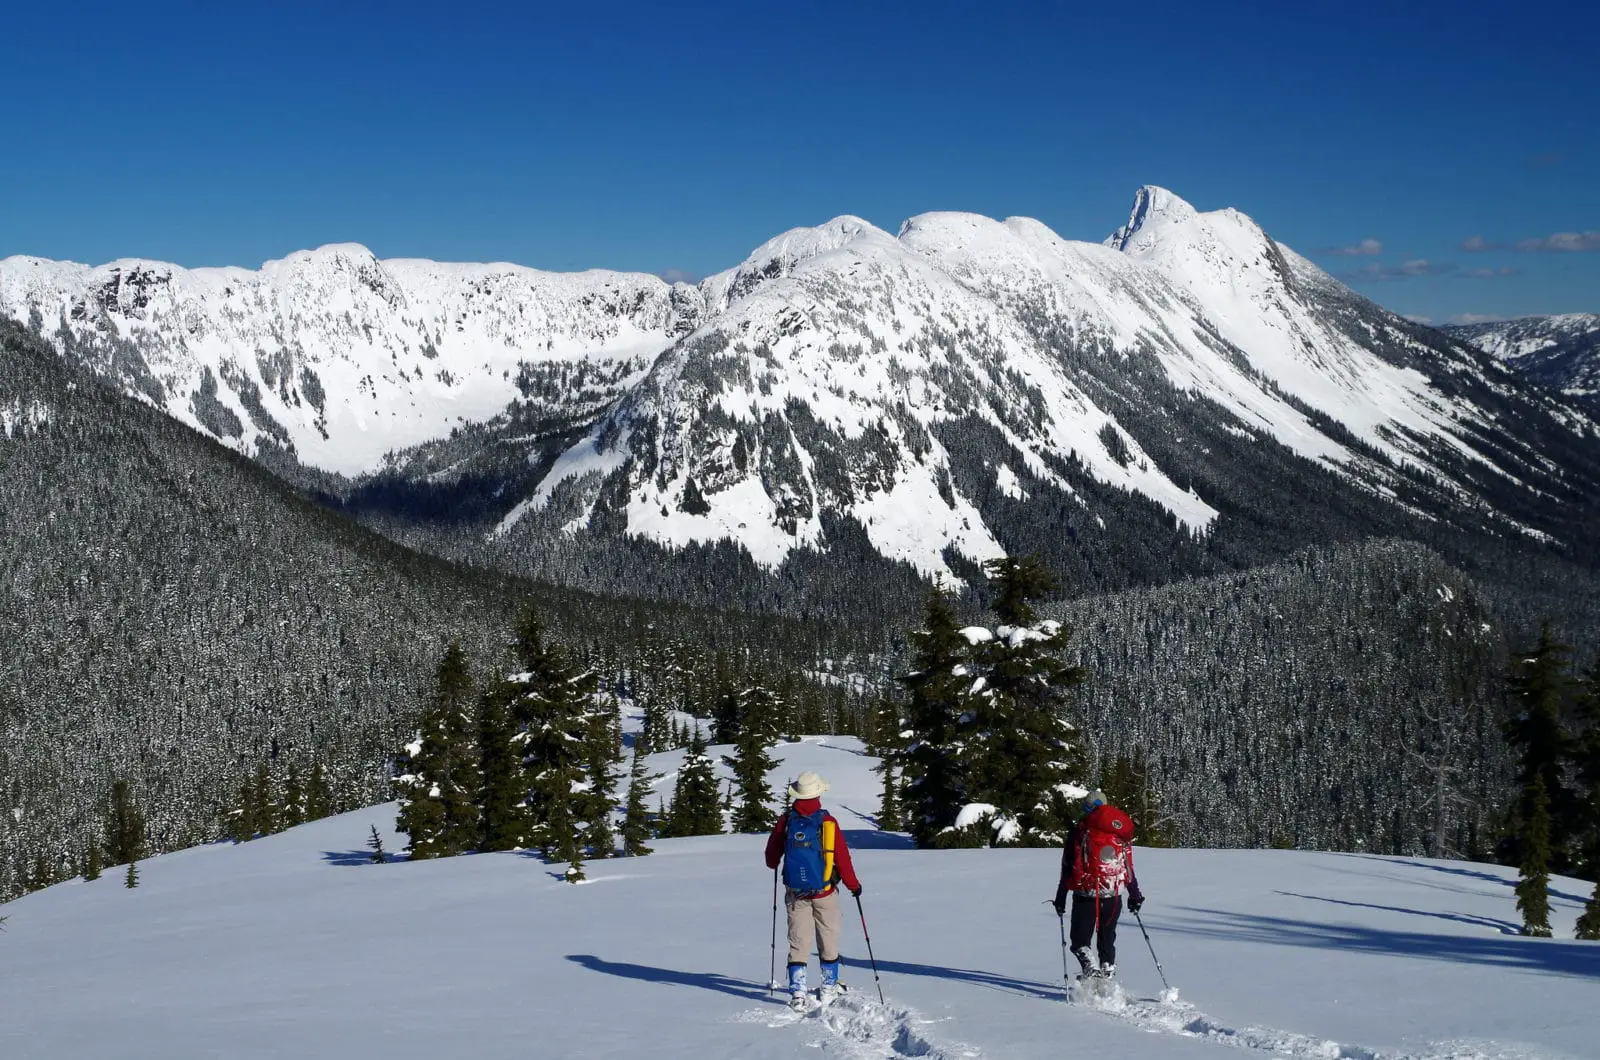 Snowshoeing in the mountains - Photo: Tim Gage (CC)